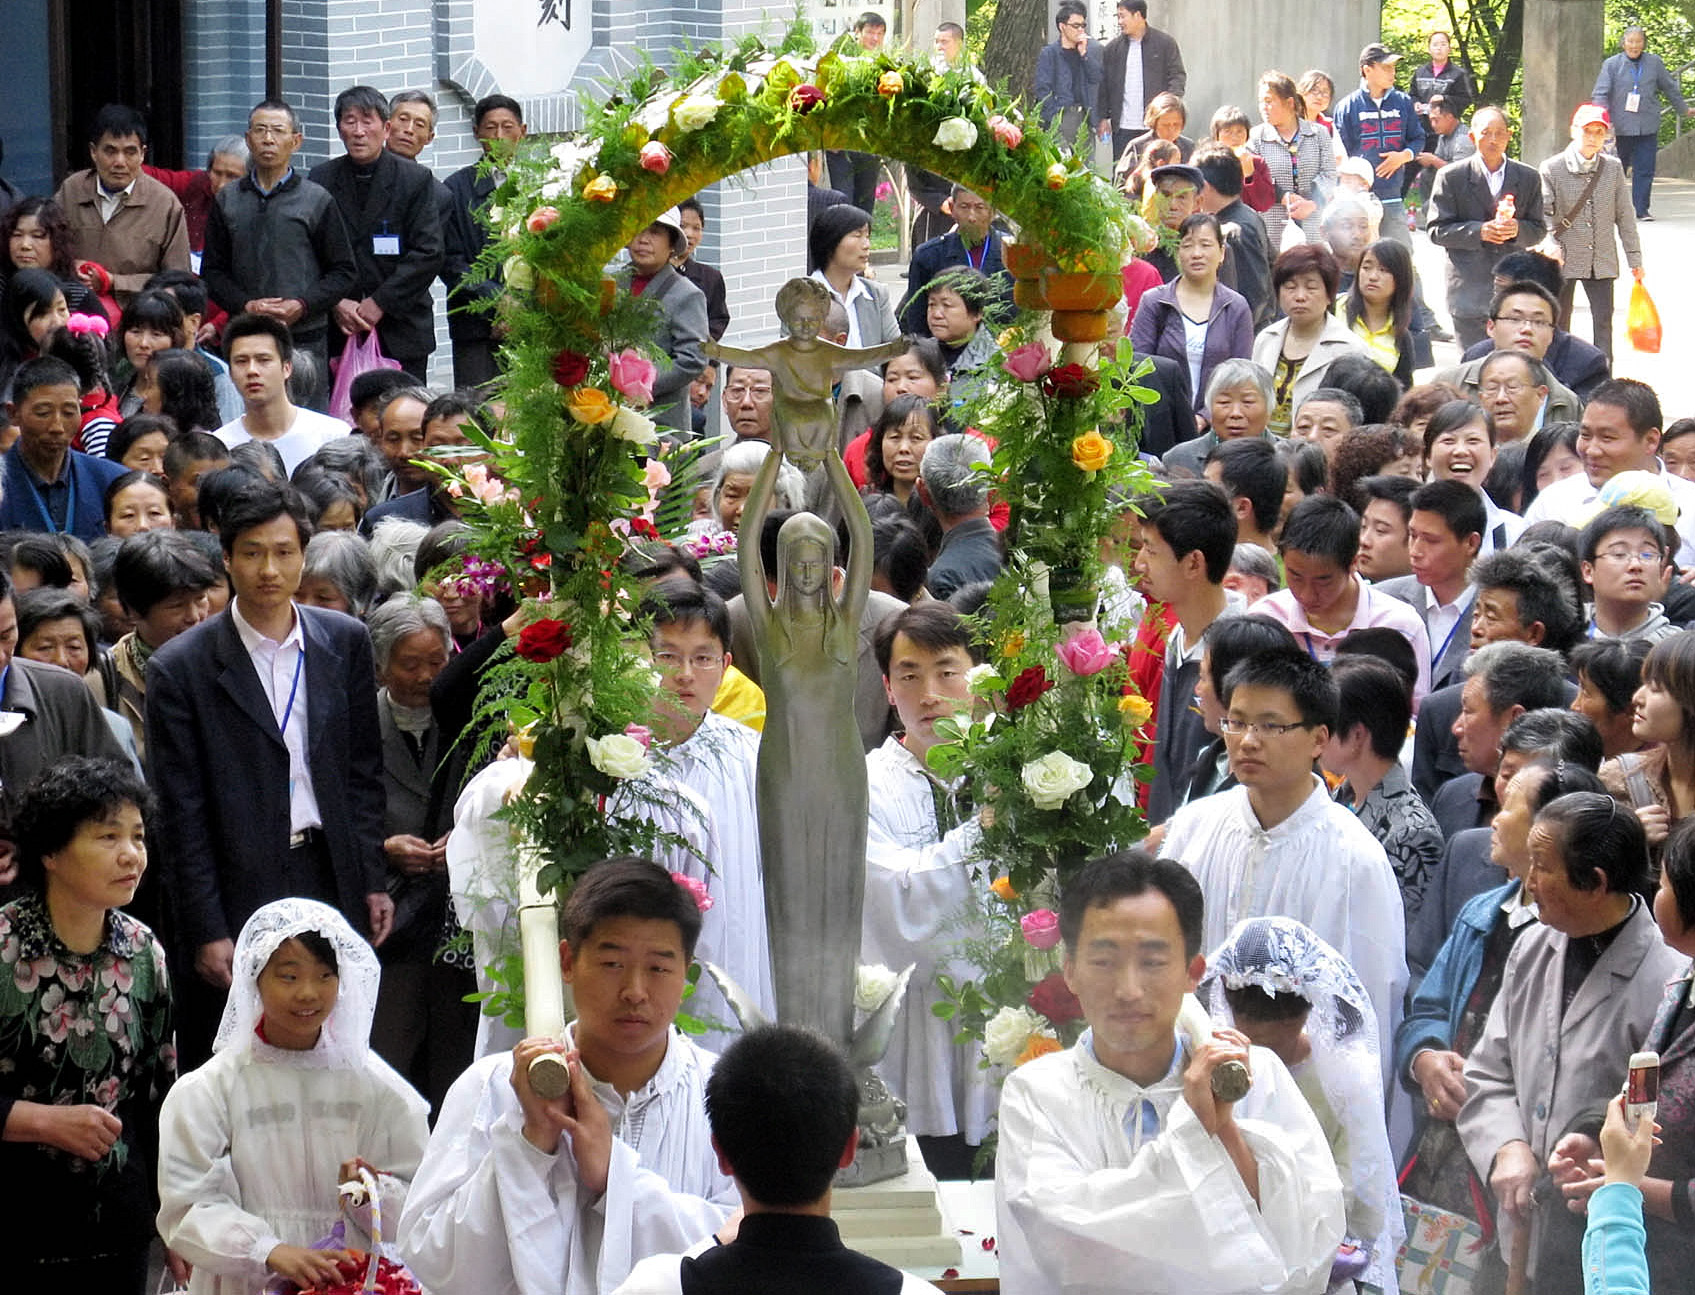 CATHOLICS CARRY STATUE OF MARY AS THEY PROCESS TO SHESHAN MARIAN SHRINE IN CHINA